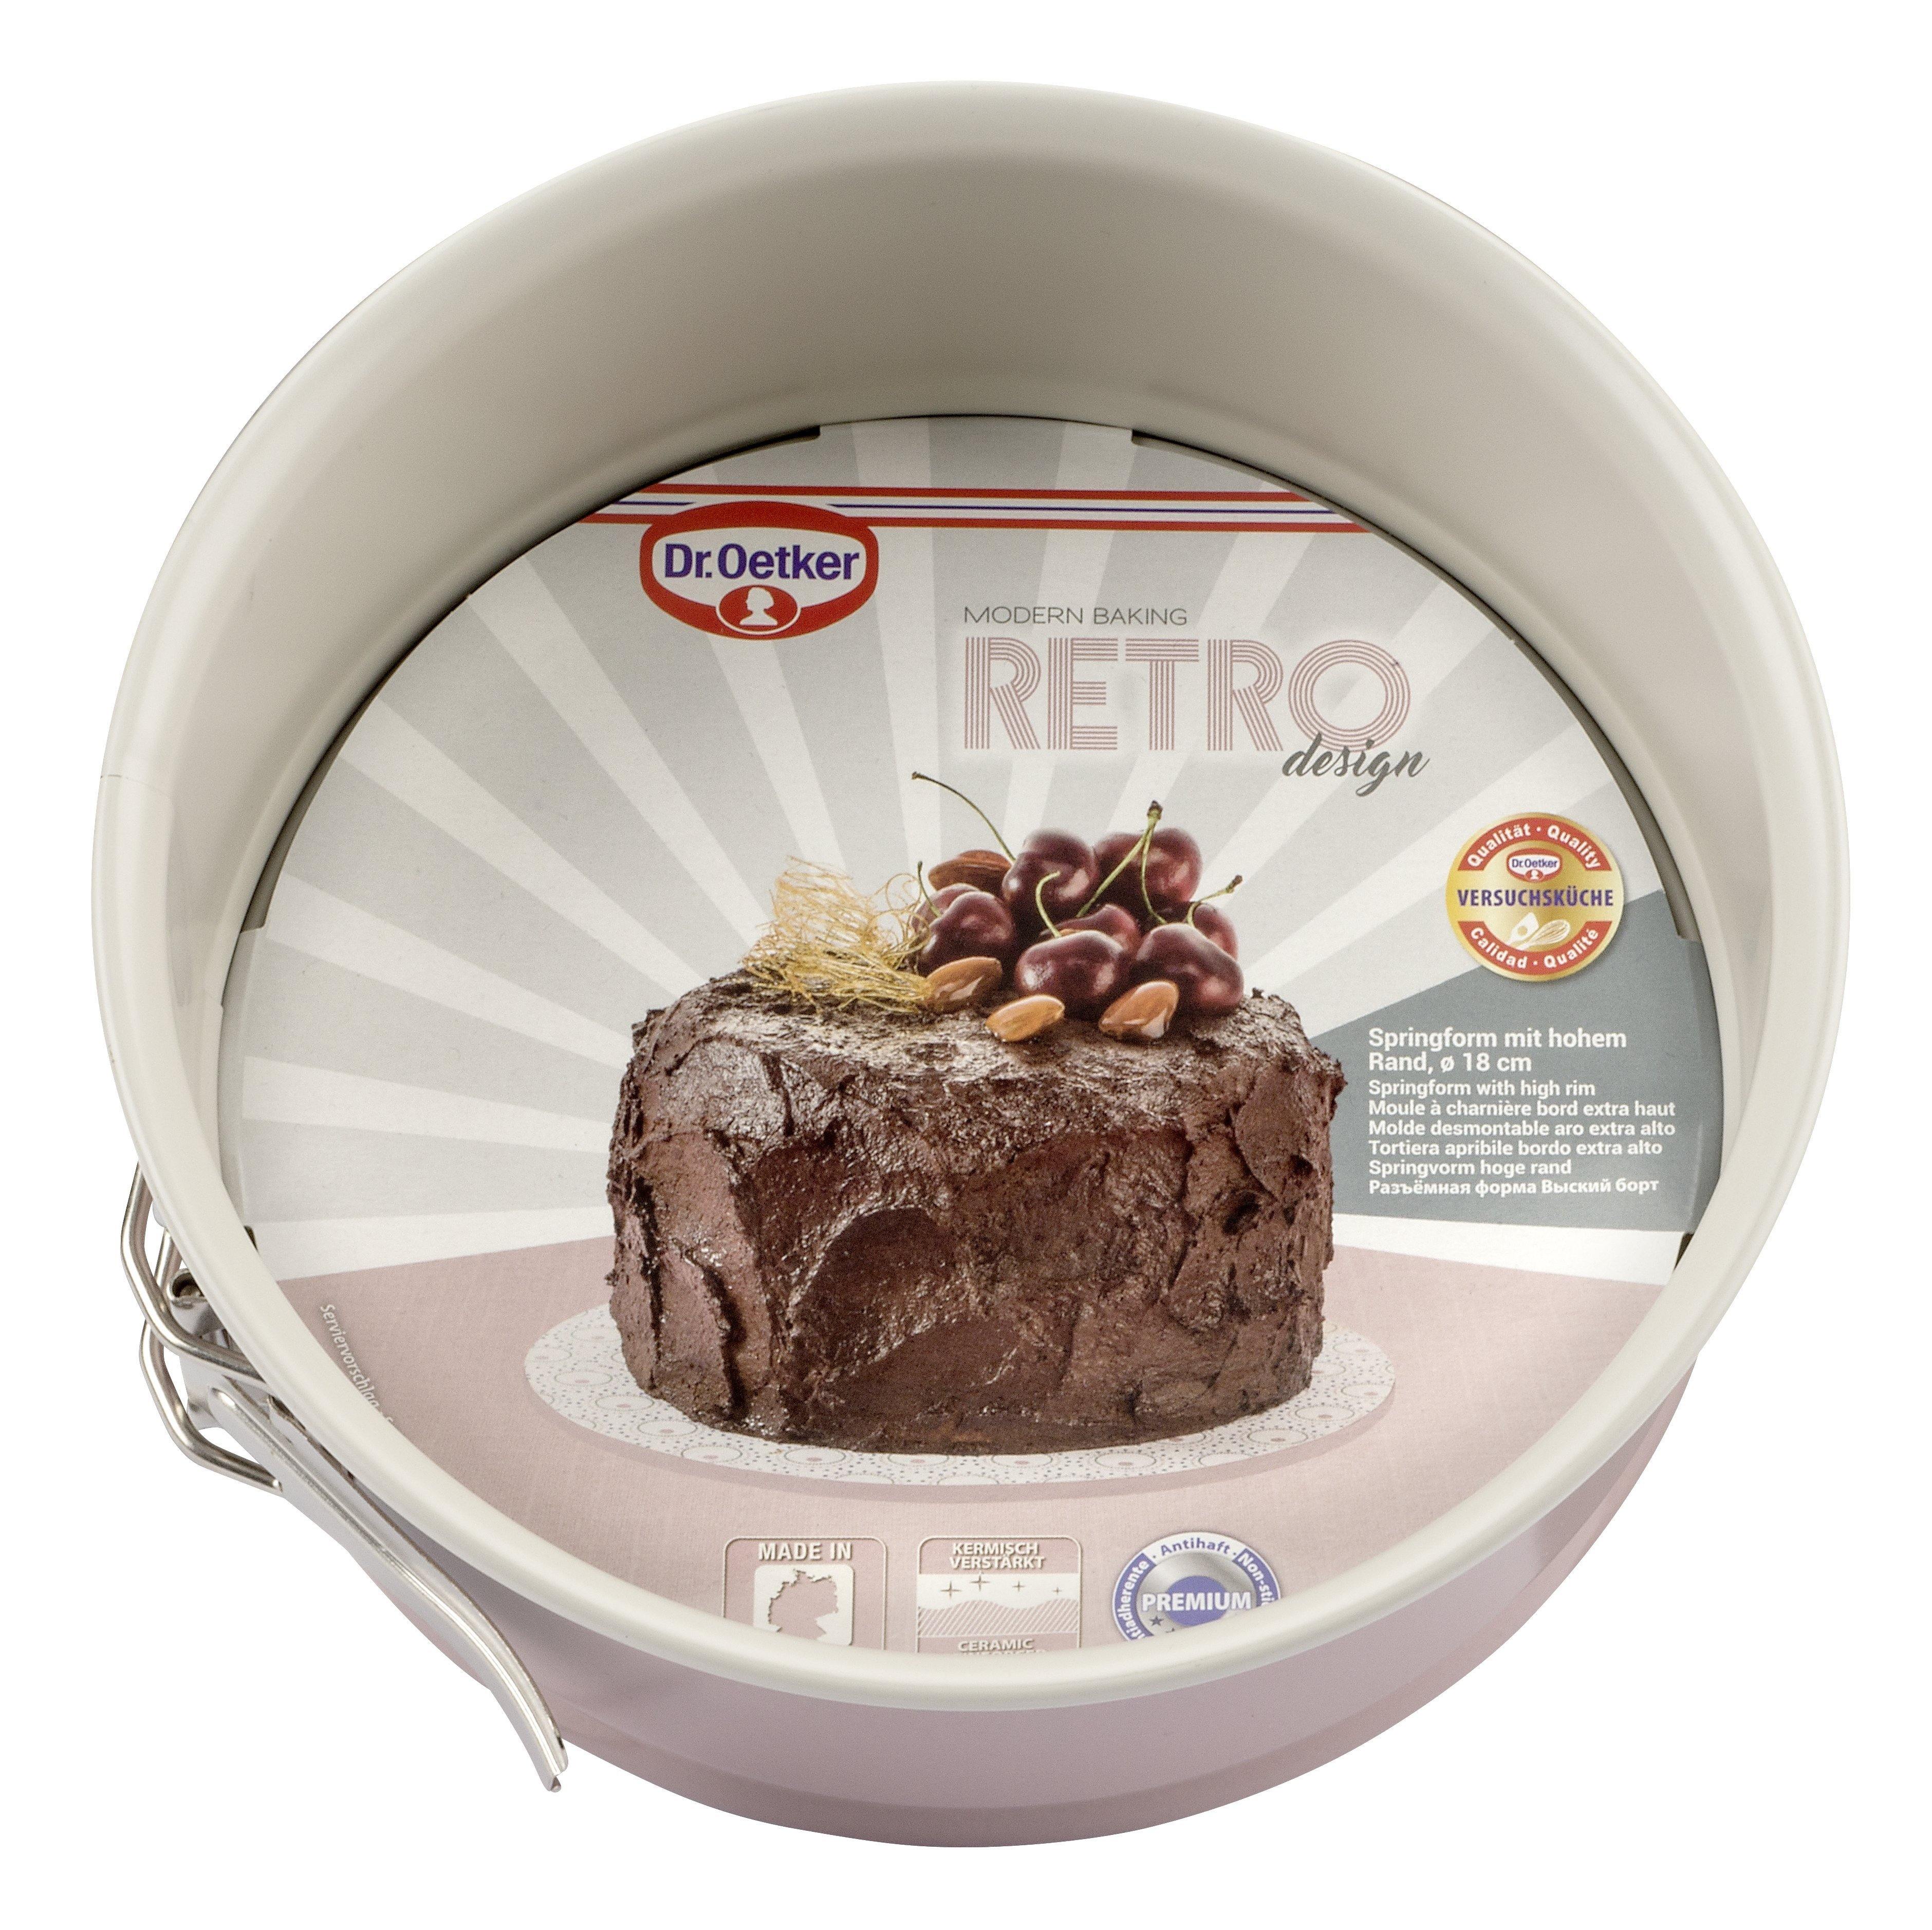 Dr. Oetker "Retro" Springform Steel Plate With Ceramic Reinforced Non-Stick Coating With High Rim, Rose/CrÃ¨me, 18X8 Cm - Whole and All